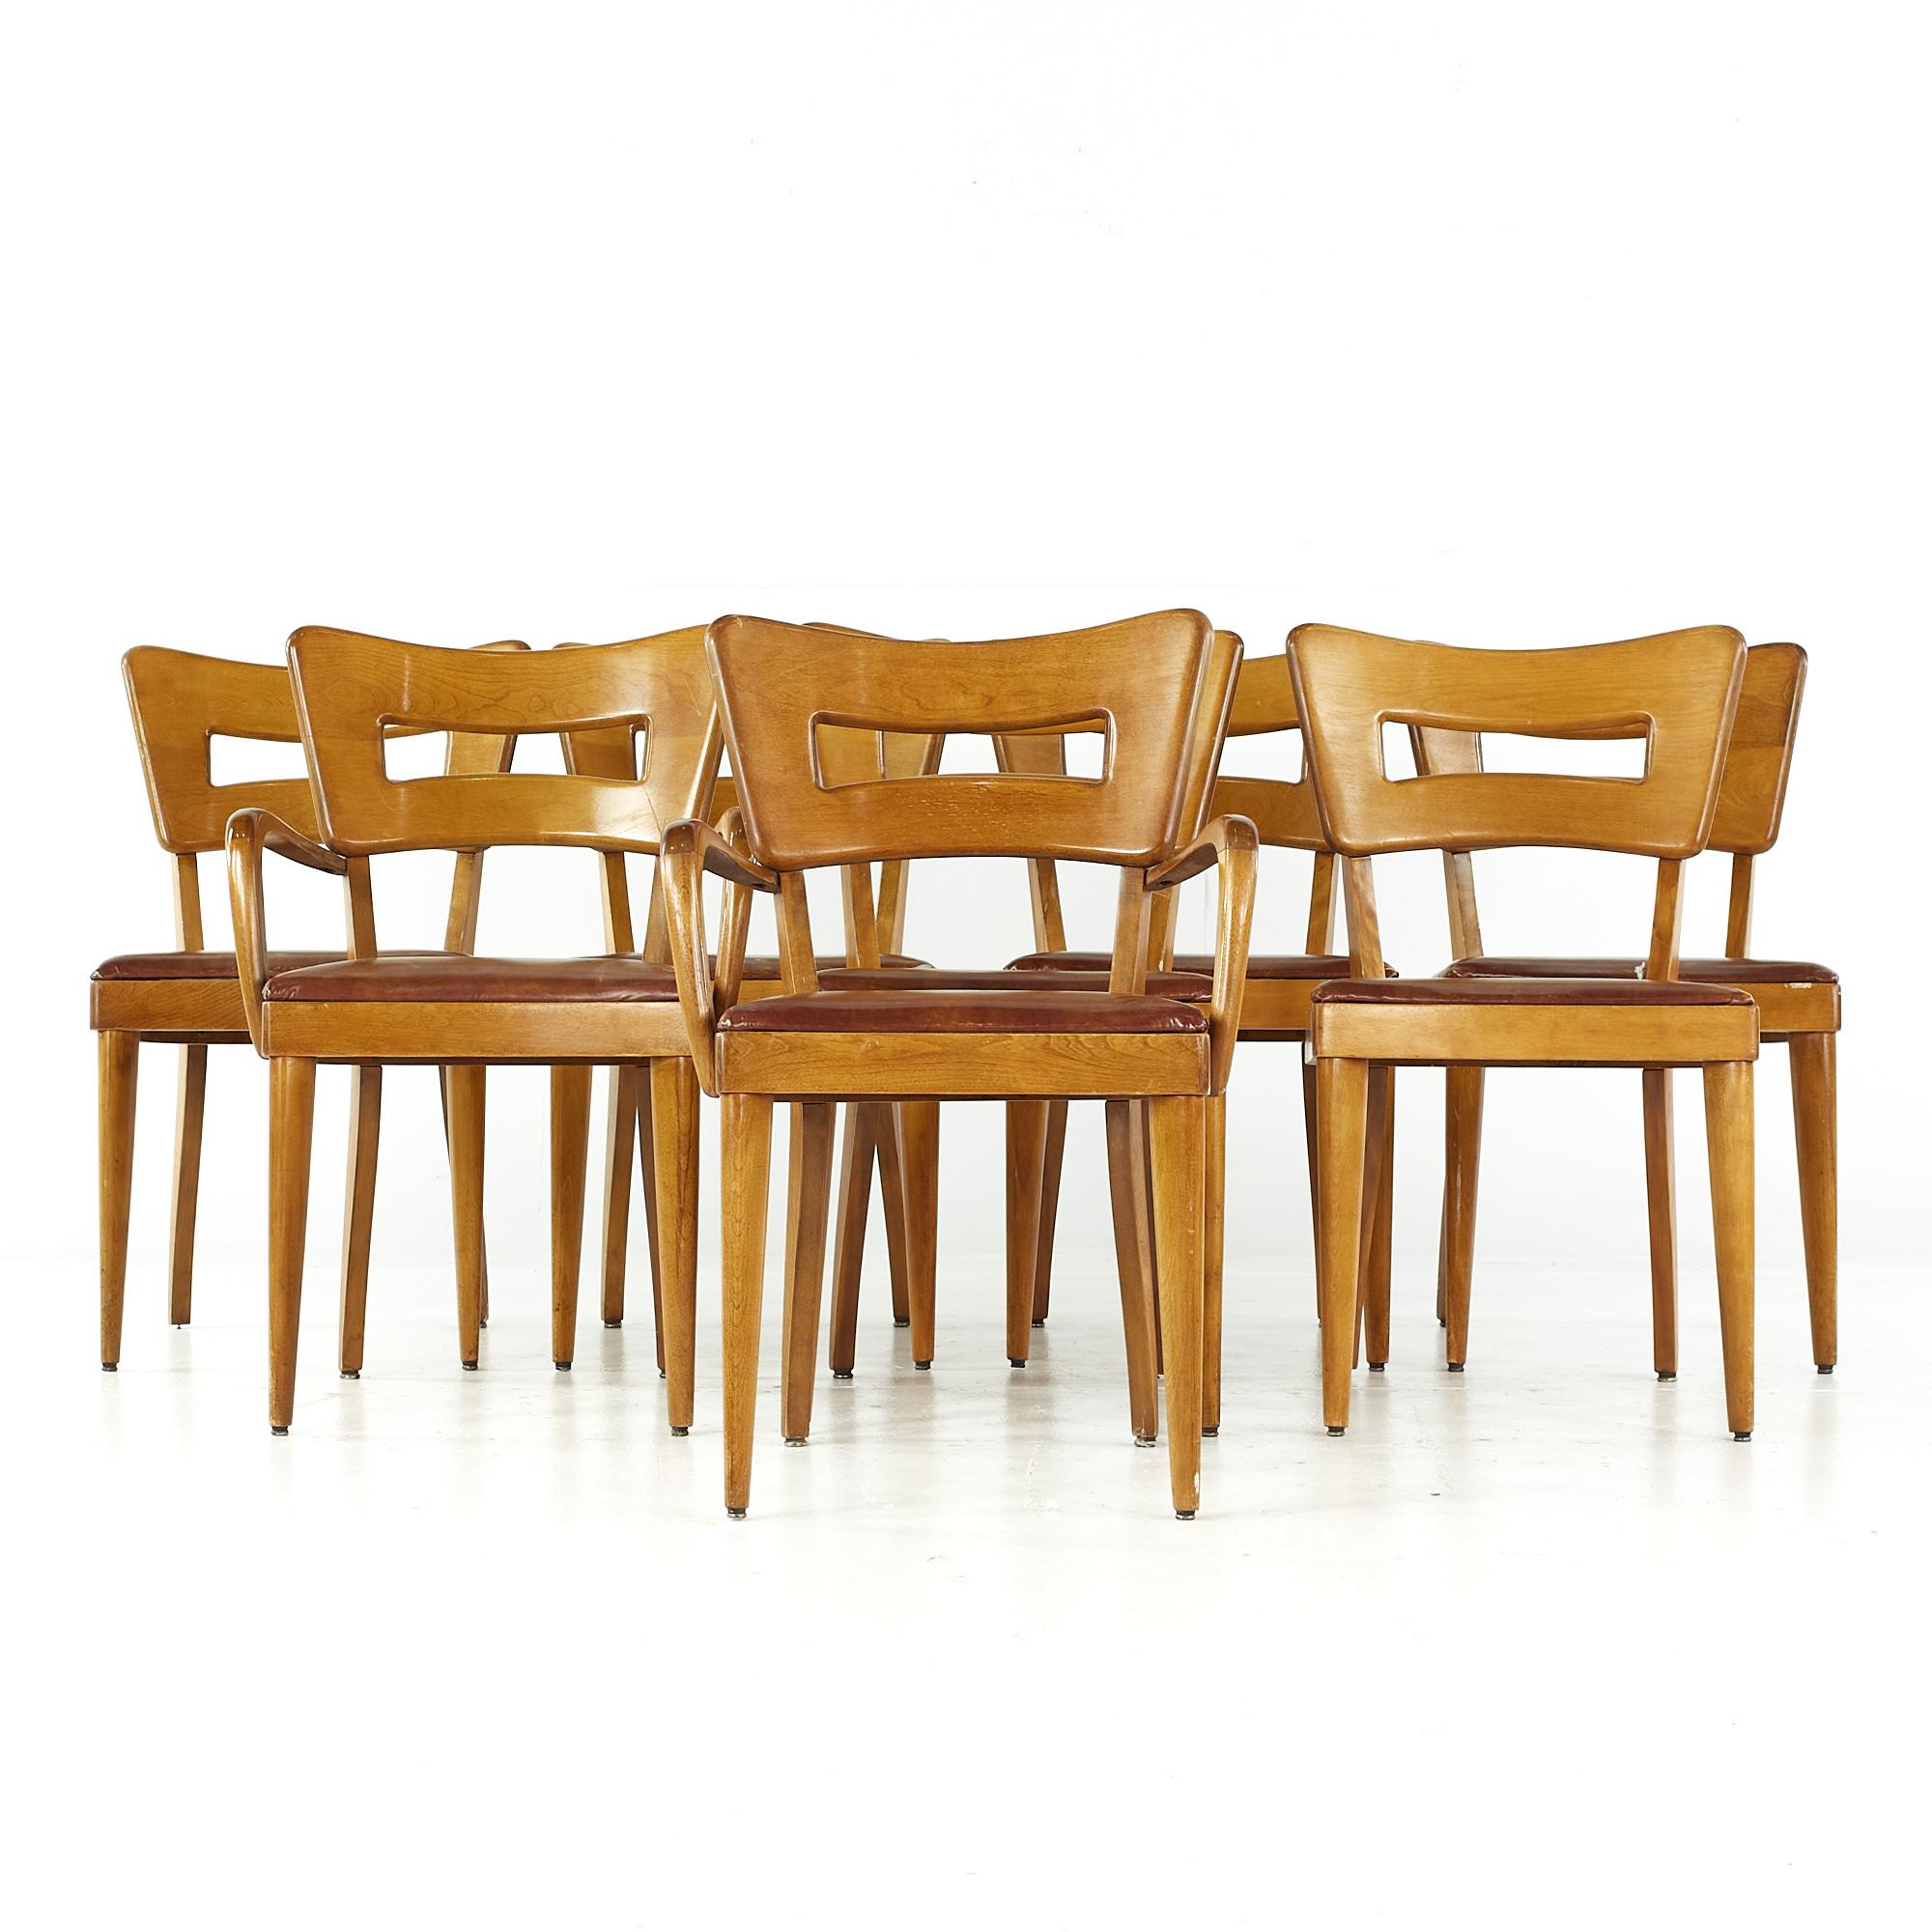 Heywood Wakefield midcentury dogbone chairs - set of 8.

Each armless chair measures: 17.75 wide x 17 deep x 33 high, with a seat height of 18.5 inches.
Each captains chair measures: 22 wide x 17 deep x 33 high, with a seat height of 18.5 inches,